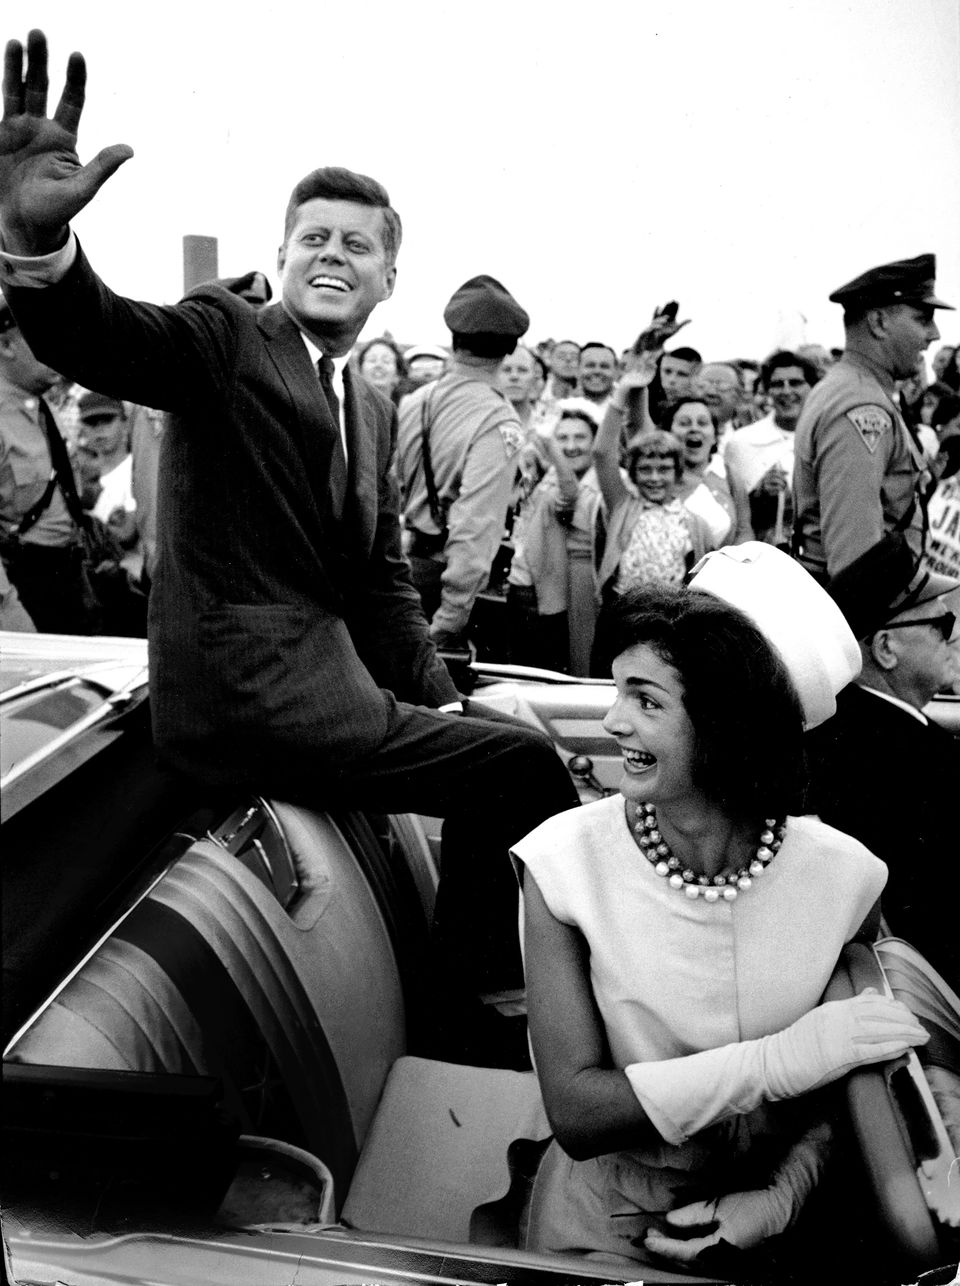 A photograph of President Kennedy waving to the crowd in his car from the exhibition American Visionary: John F. Kennedy's Life and Times